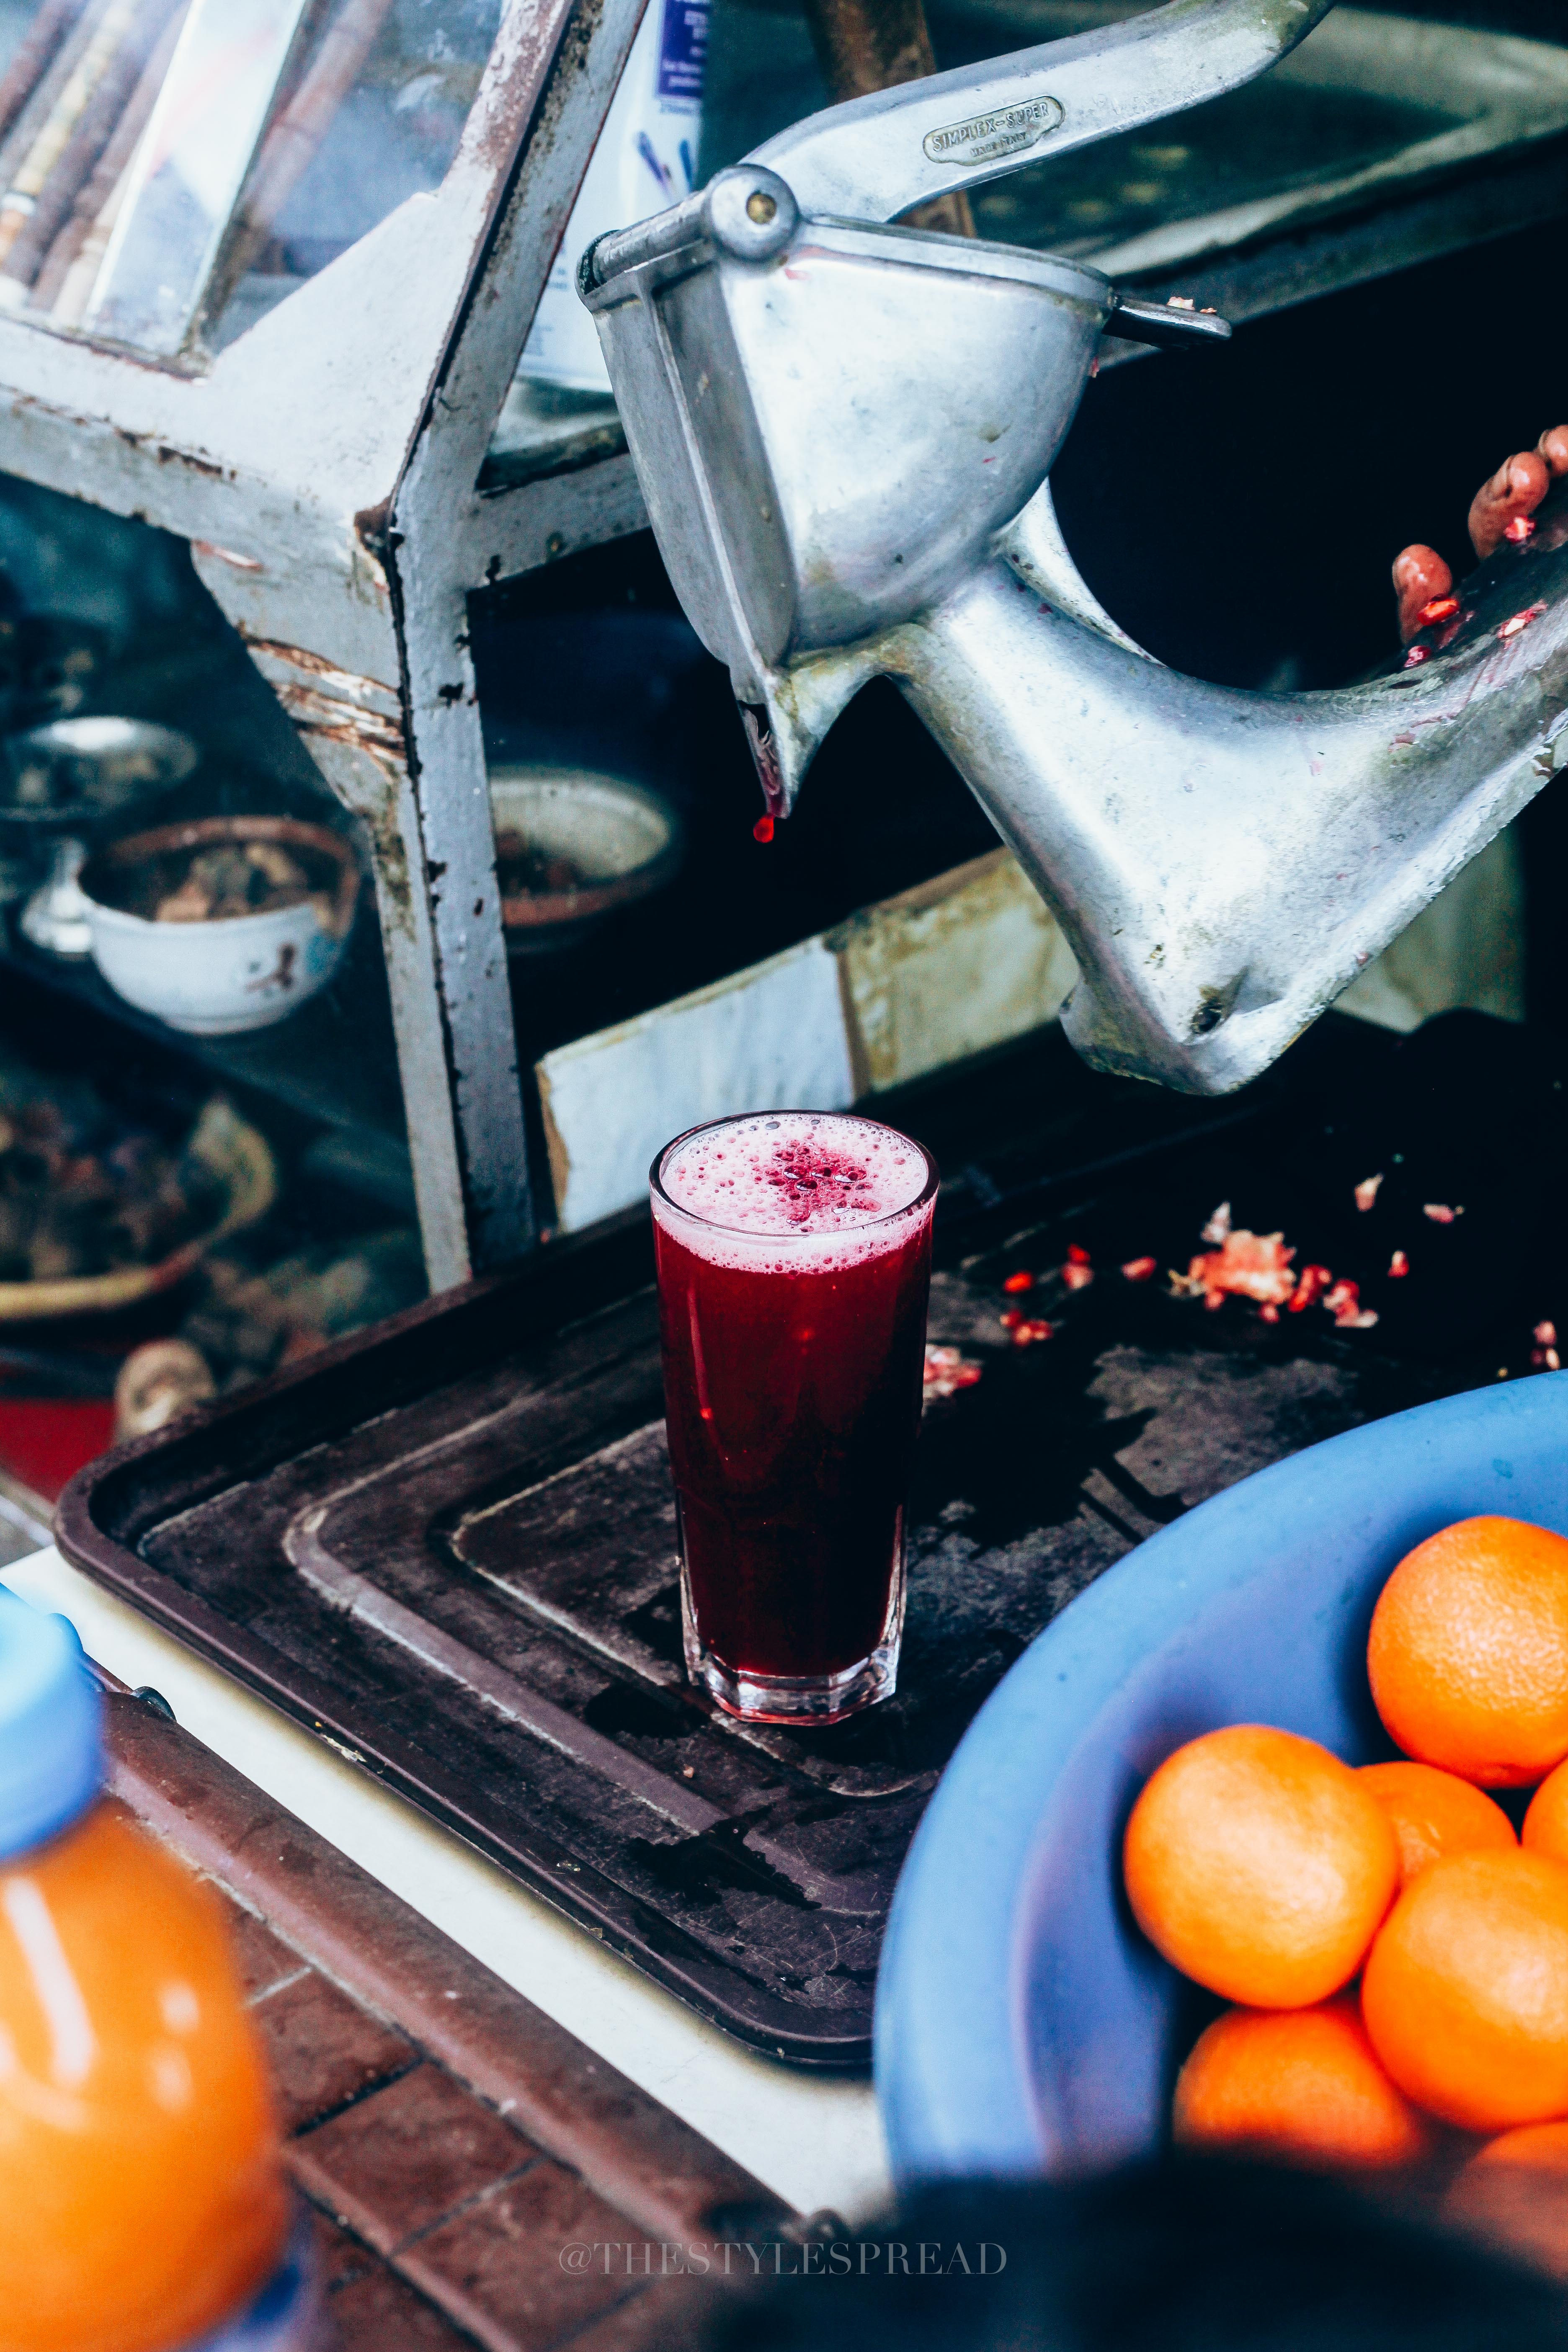 Pomegranate juice and Tangier